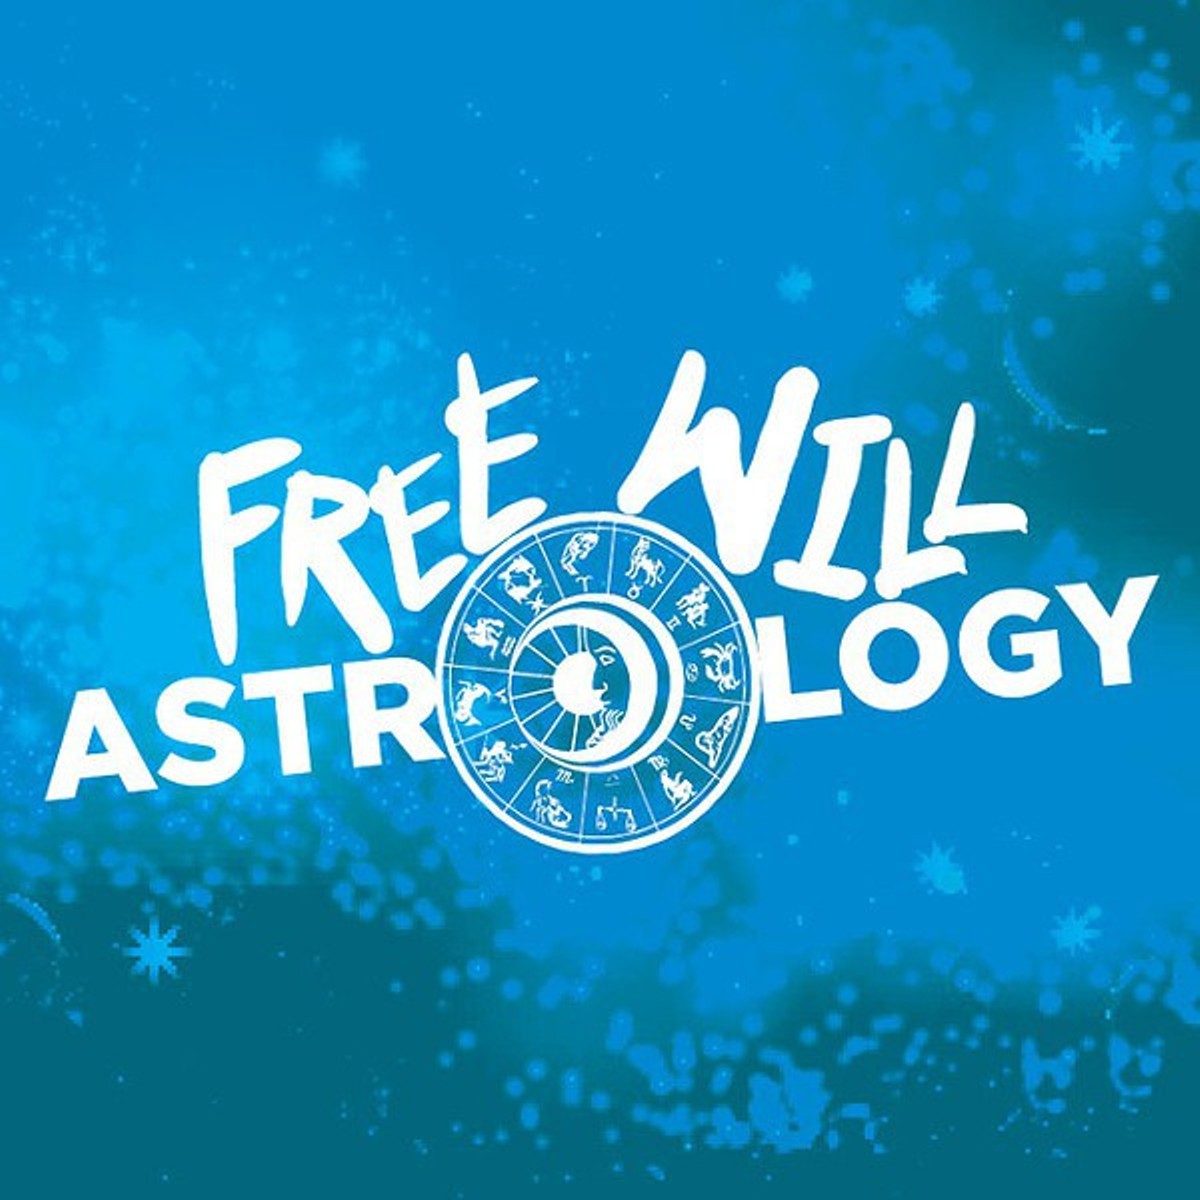 Free Will Astrology (11/11/15)